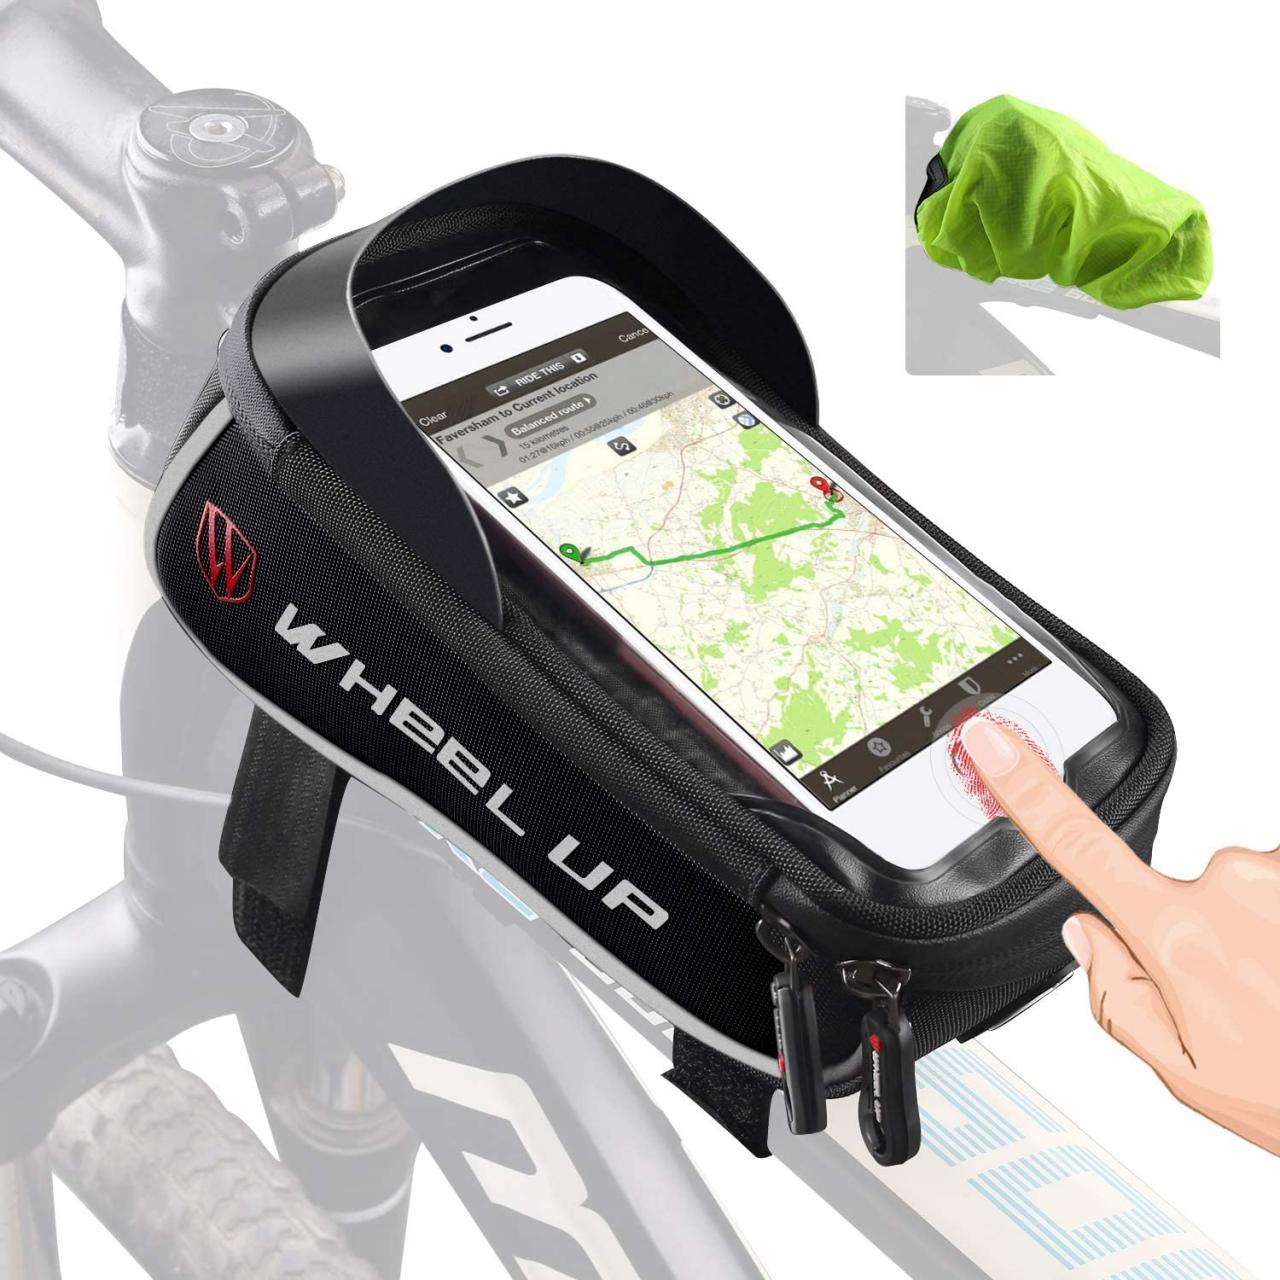 Buy FlexDin Bike Frame Bag Waterproof Top Tube Bicycle Bag Touch-ID Unlock  Cell Phone Holder Mount with Full-Size Rain Cover for iPhone XS/7/8 Plus  Huawei Samsung Galaxy Online in Turkey. B07R4LPQ4L